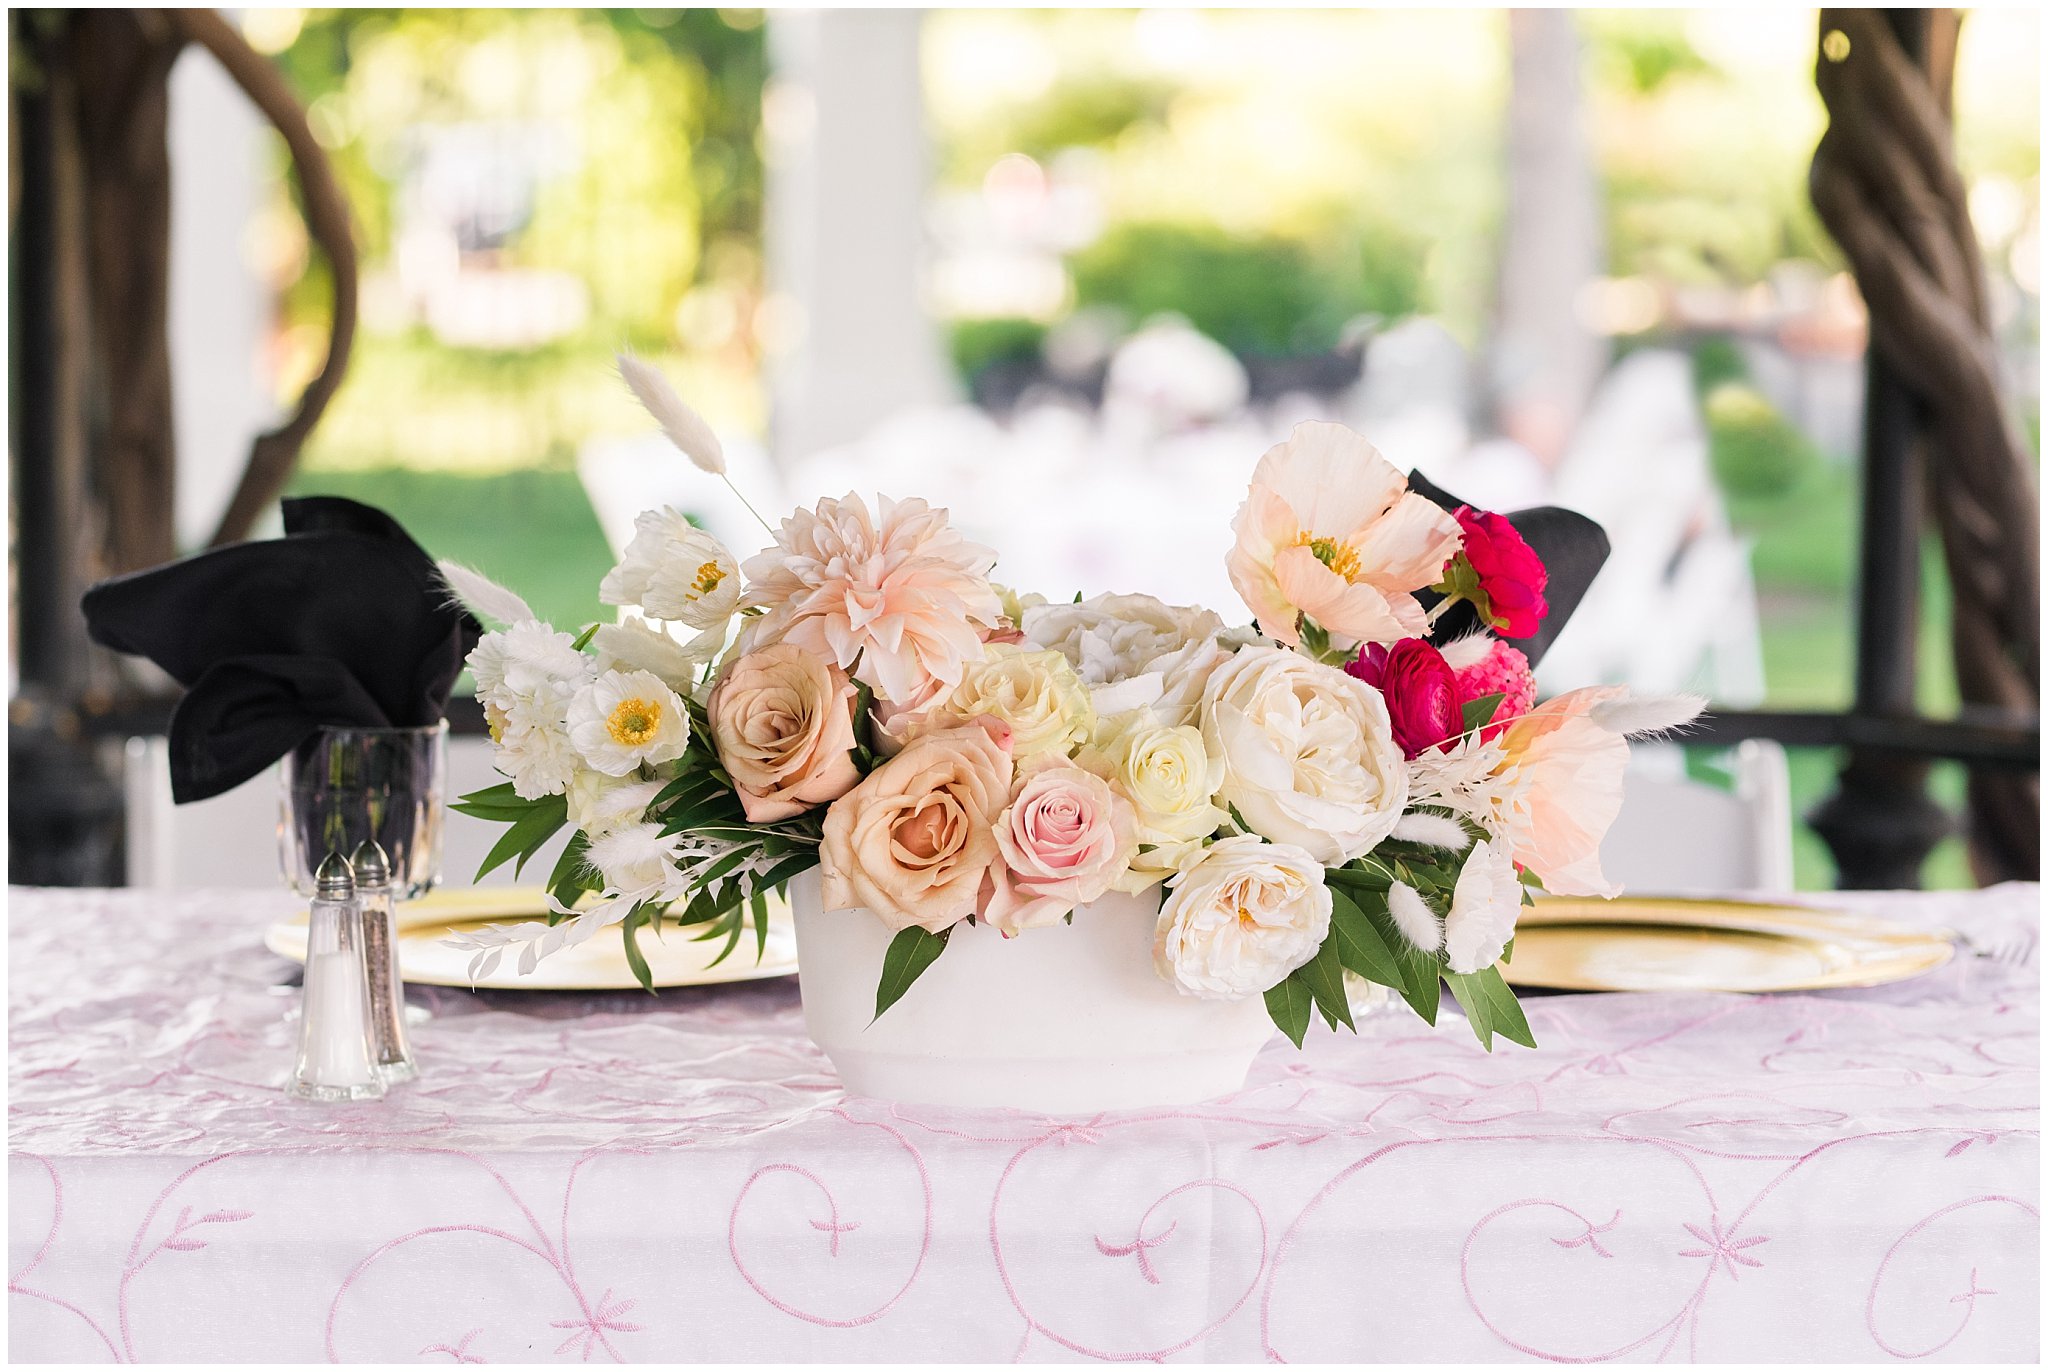 Table place setting for dinner with golden plates, white and deep pink florals in the garden | Wadley Farms Summer Wedding | Jessie and Dallin Photography